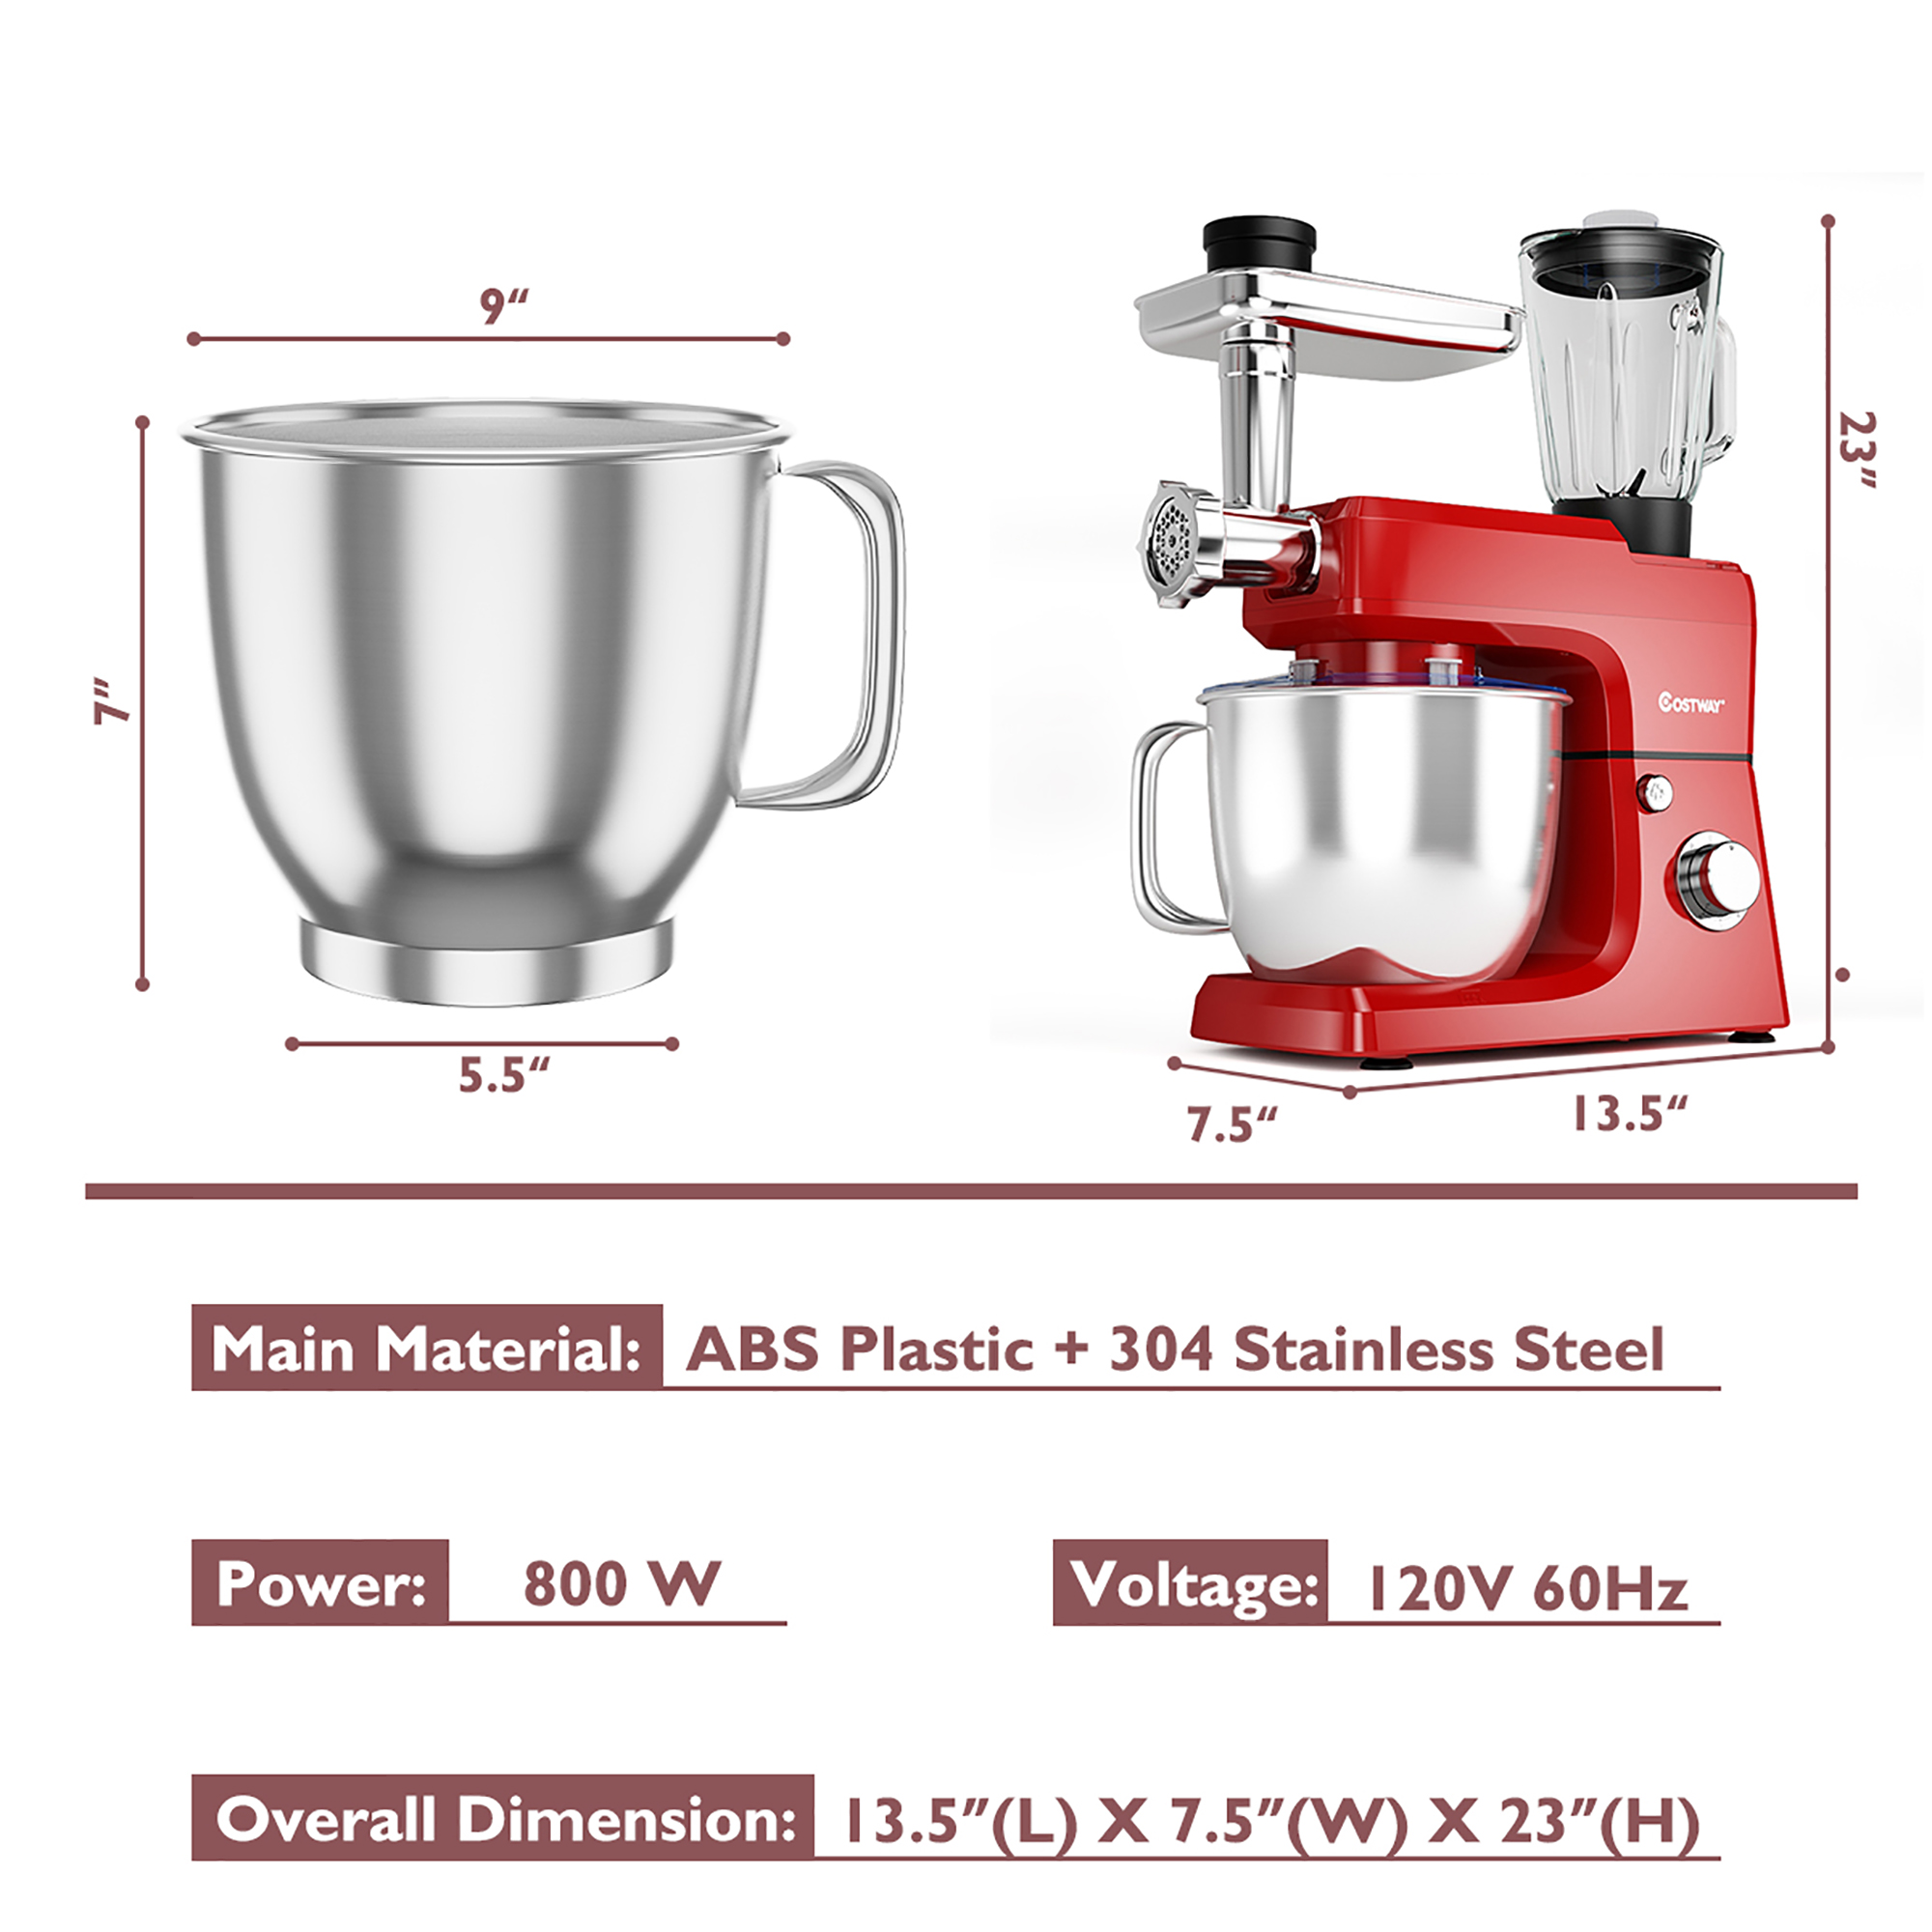 Costway 3 in 1 Multi-functional 800W Stand Mixer Meat Grinder Blender Sausage Stuffer Red - image 4 of 10